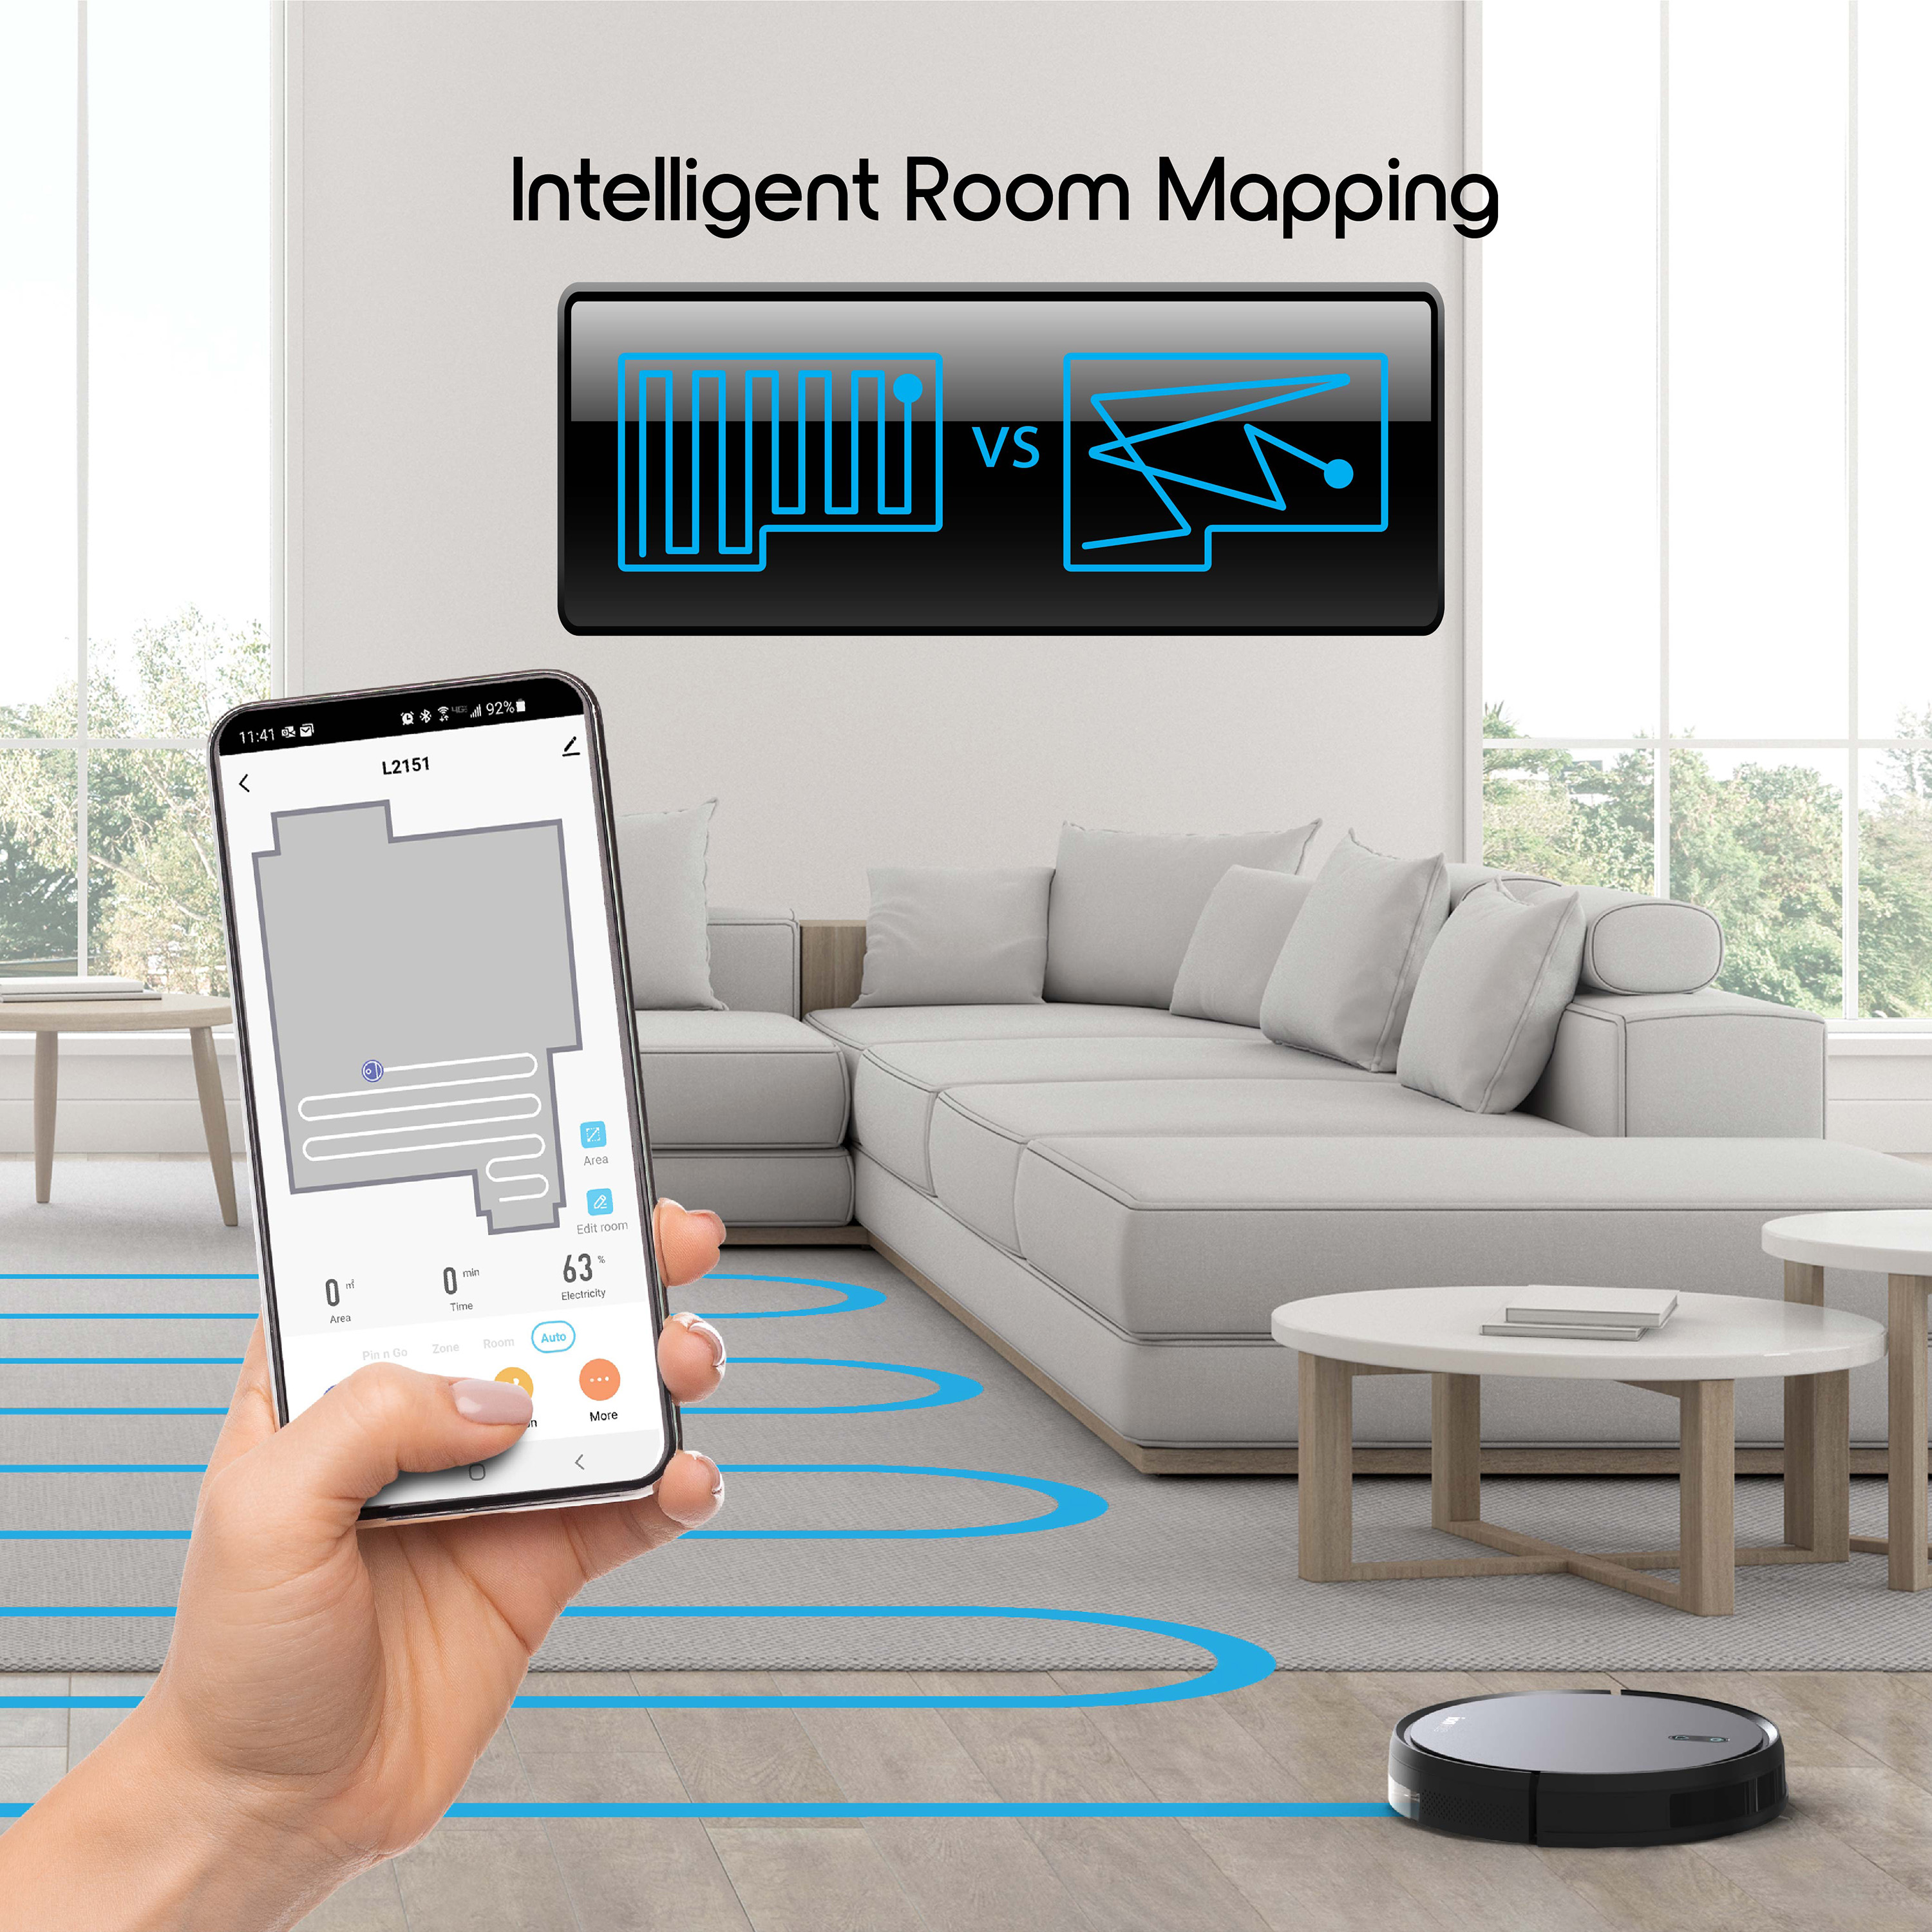 IonVac UltraClean Robovac with Smart Mapping, Wi-Fi Robot Vacuum Cleaner with App/Remote Control - image 3 of 10